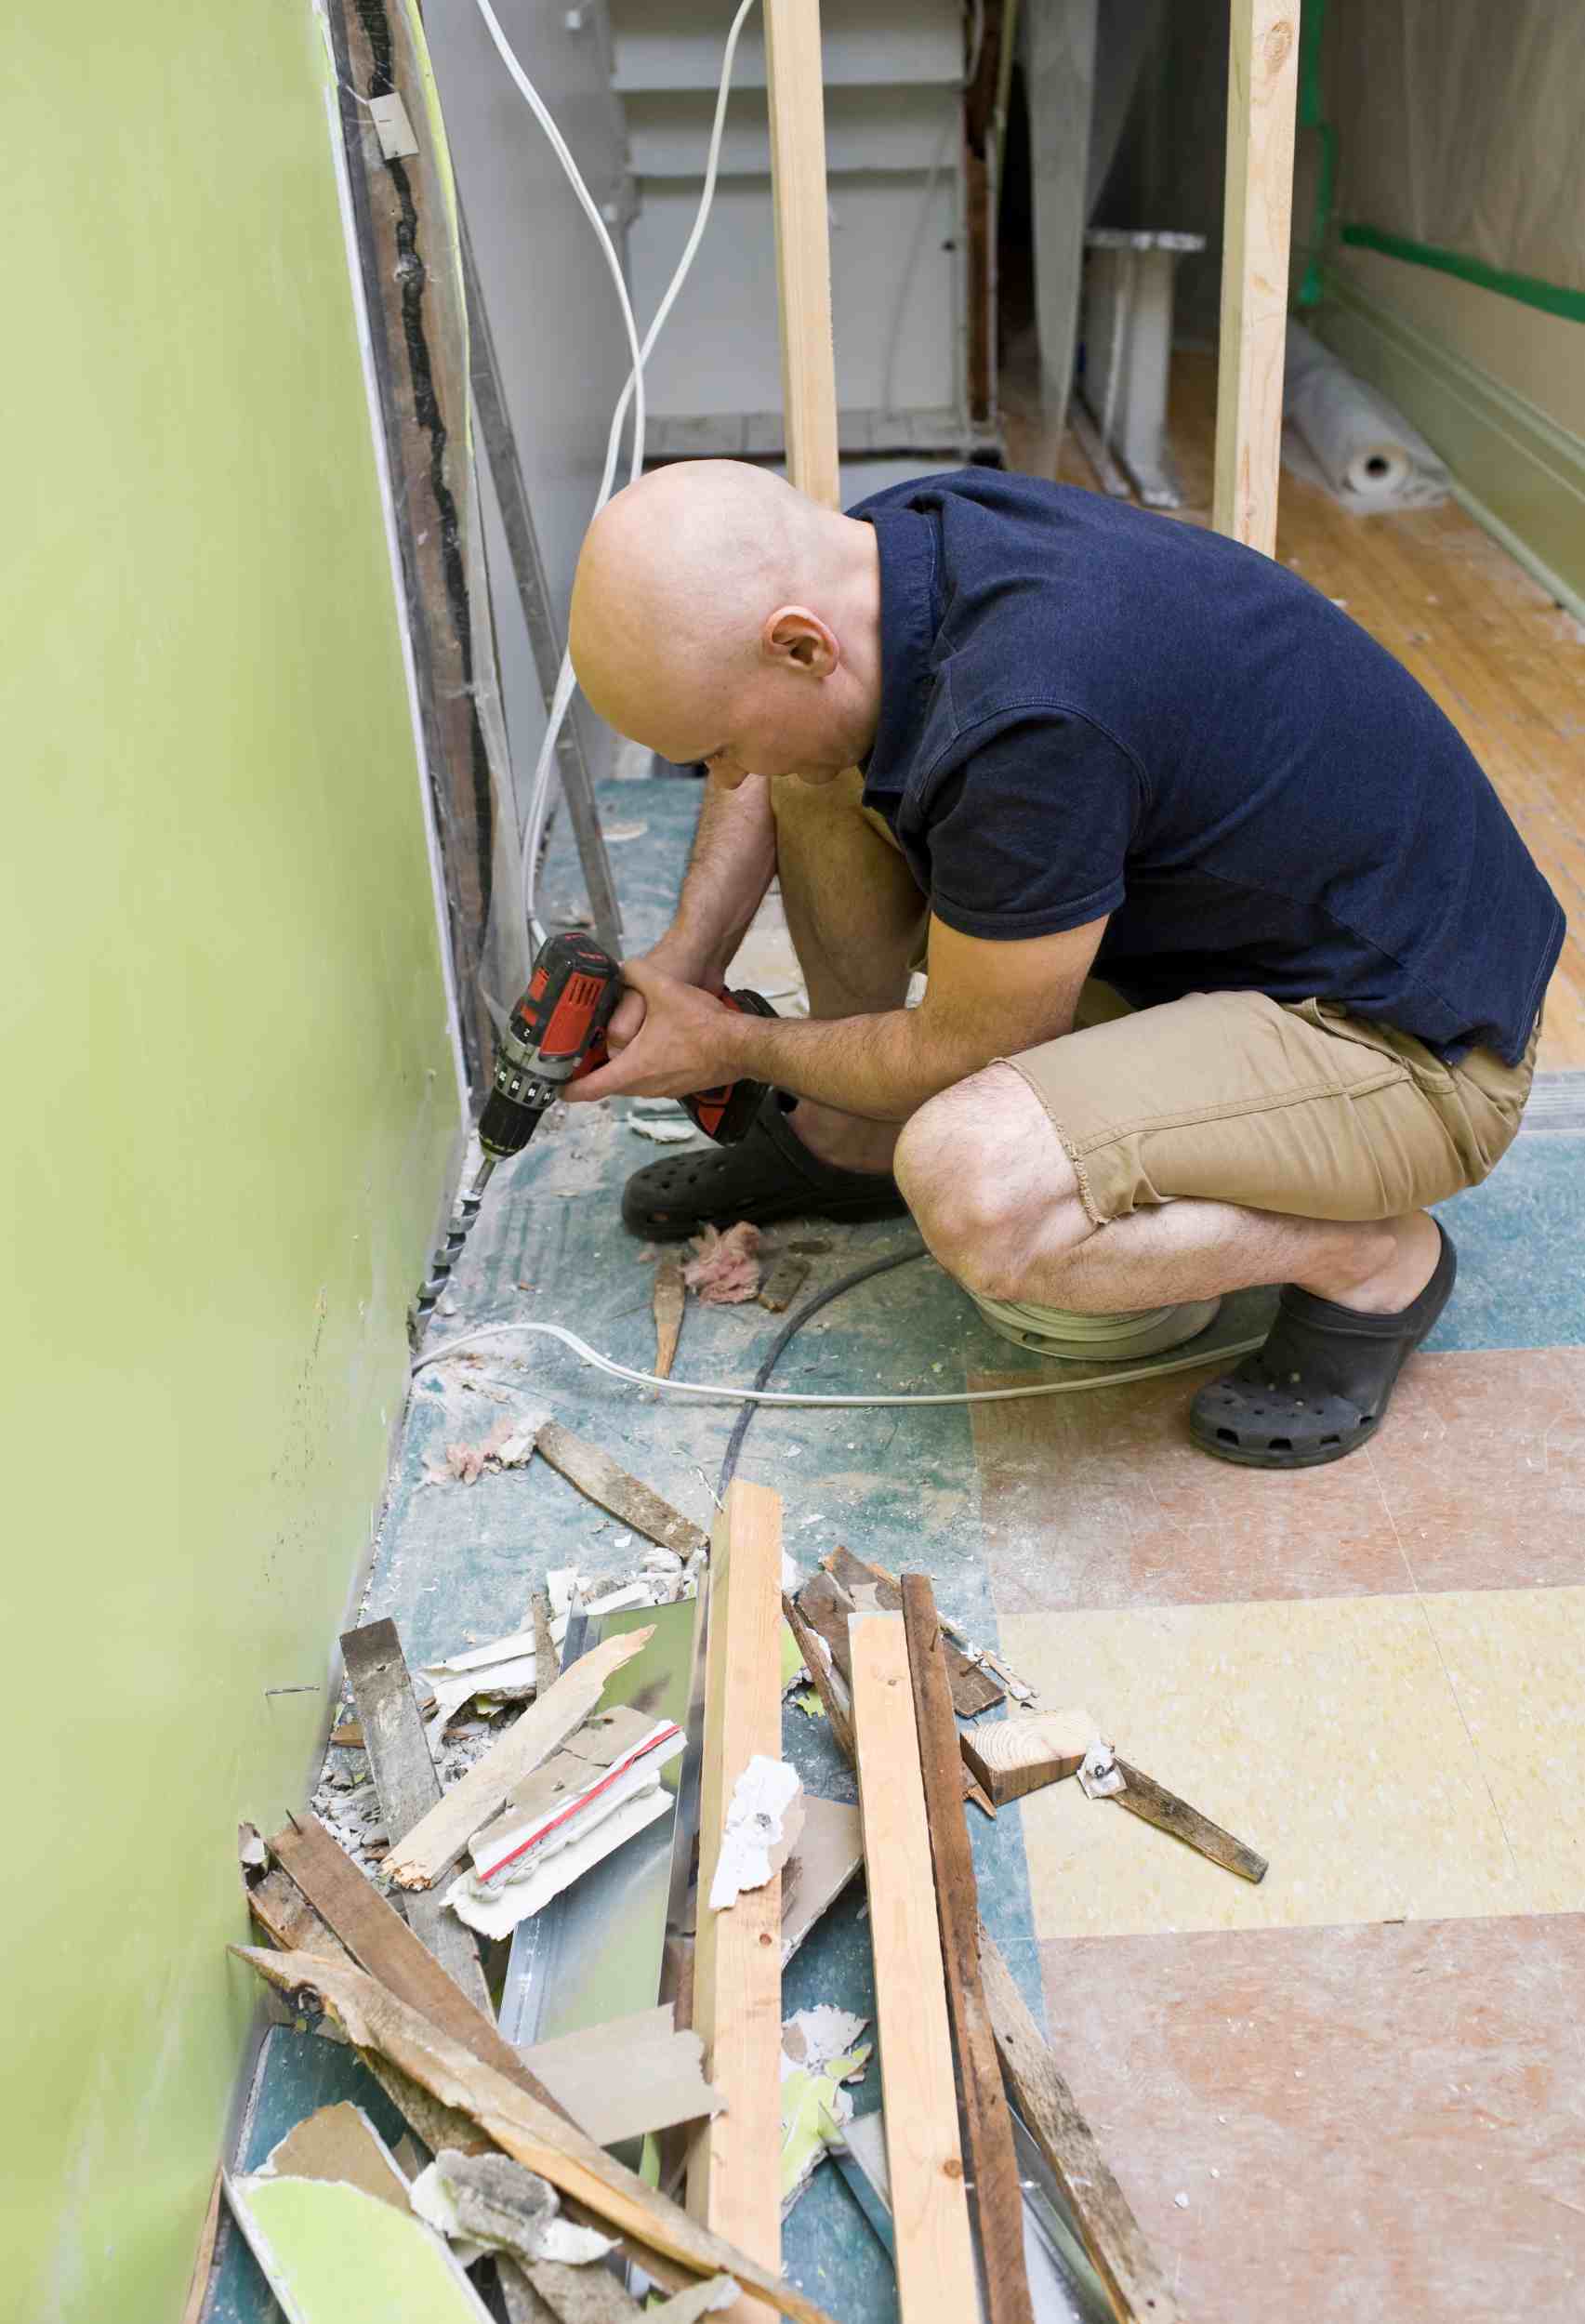 The Top 5 Home Repairs You Should Never Attempt to Do Yourself - Leave it to the Professionals!